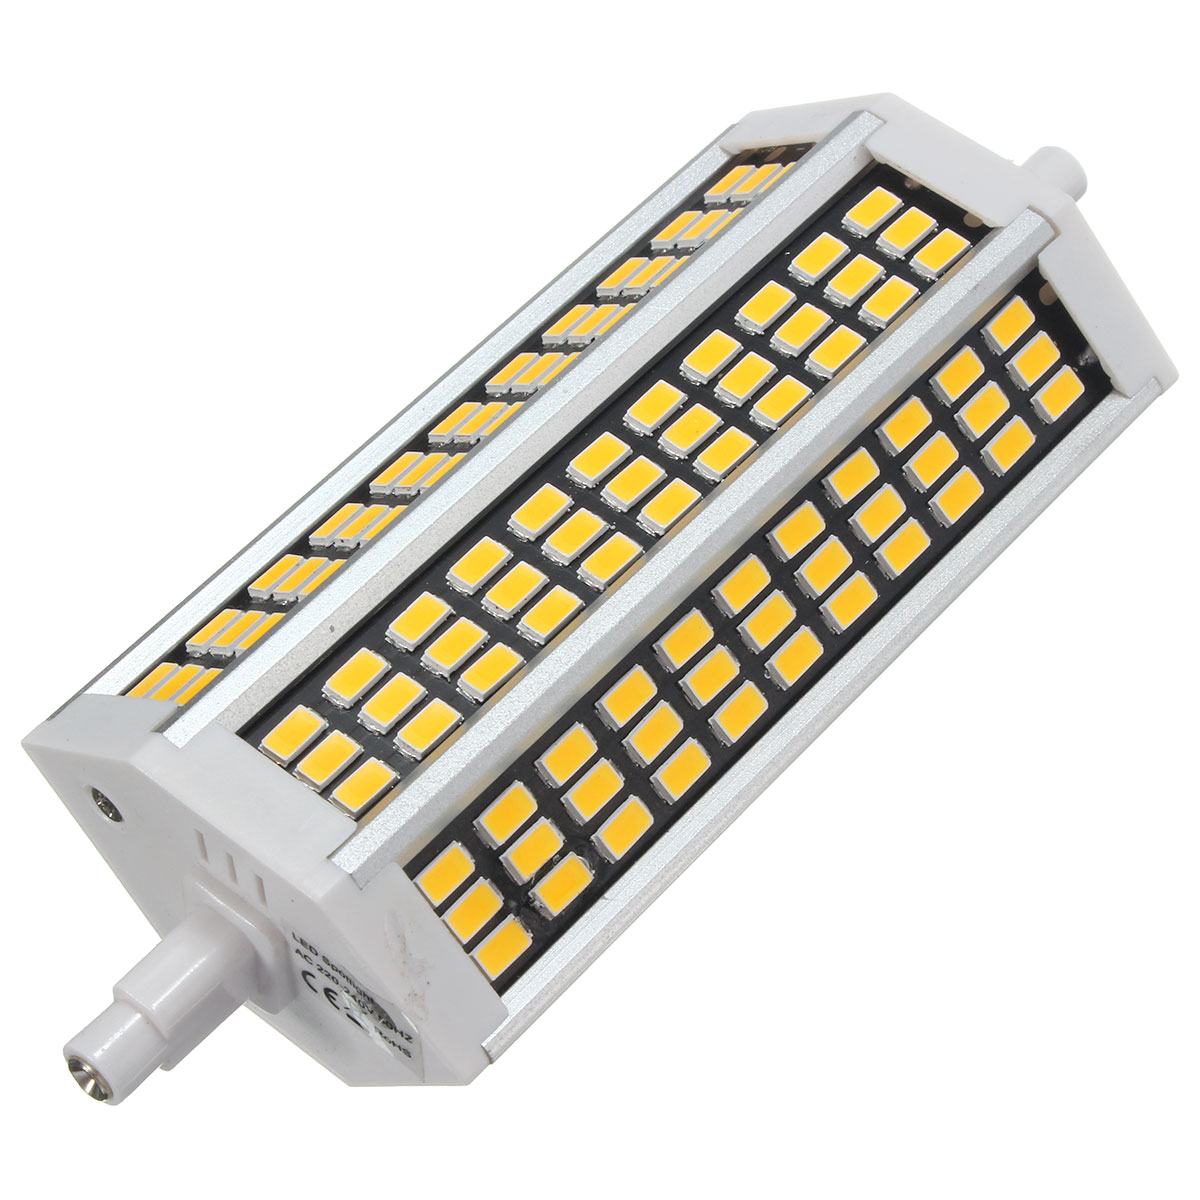 Find 110V/220V 10W R7S 81 SMD 5733 LEDs Flood Light Bulb Pure/Warm White Light for Sale on Gipsybee.com with cryptocurrencies